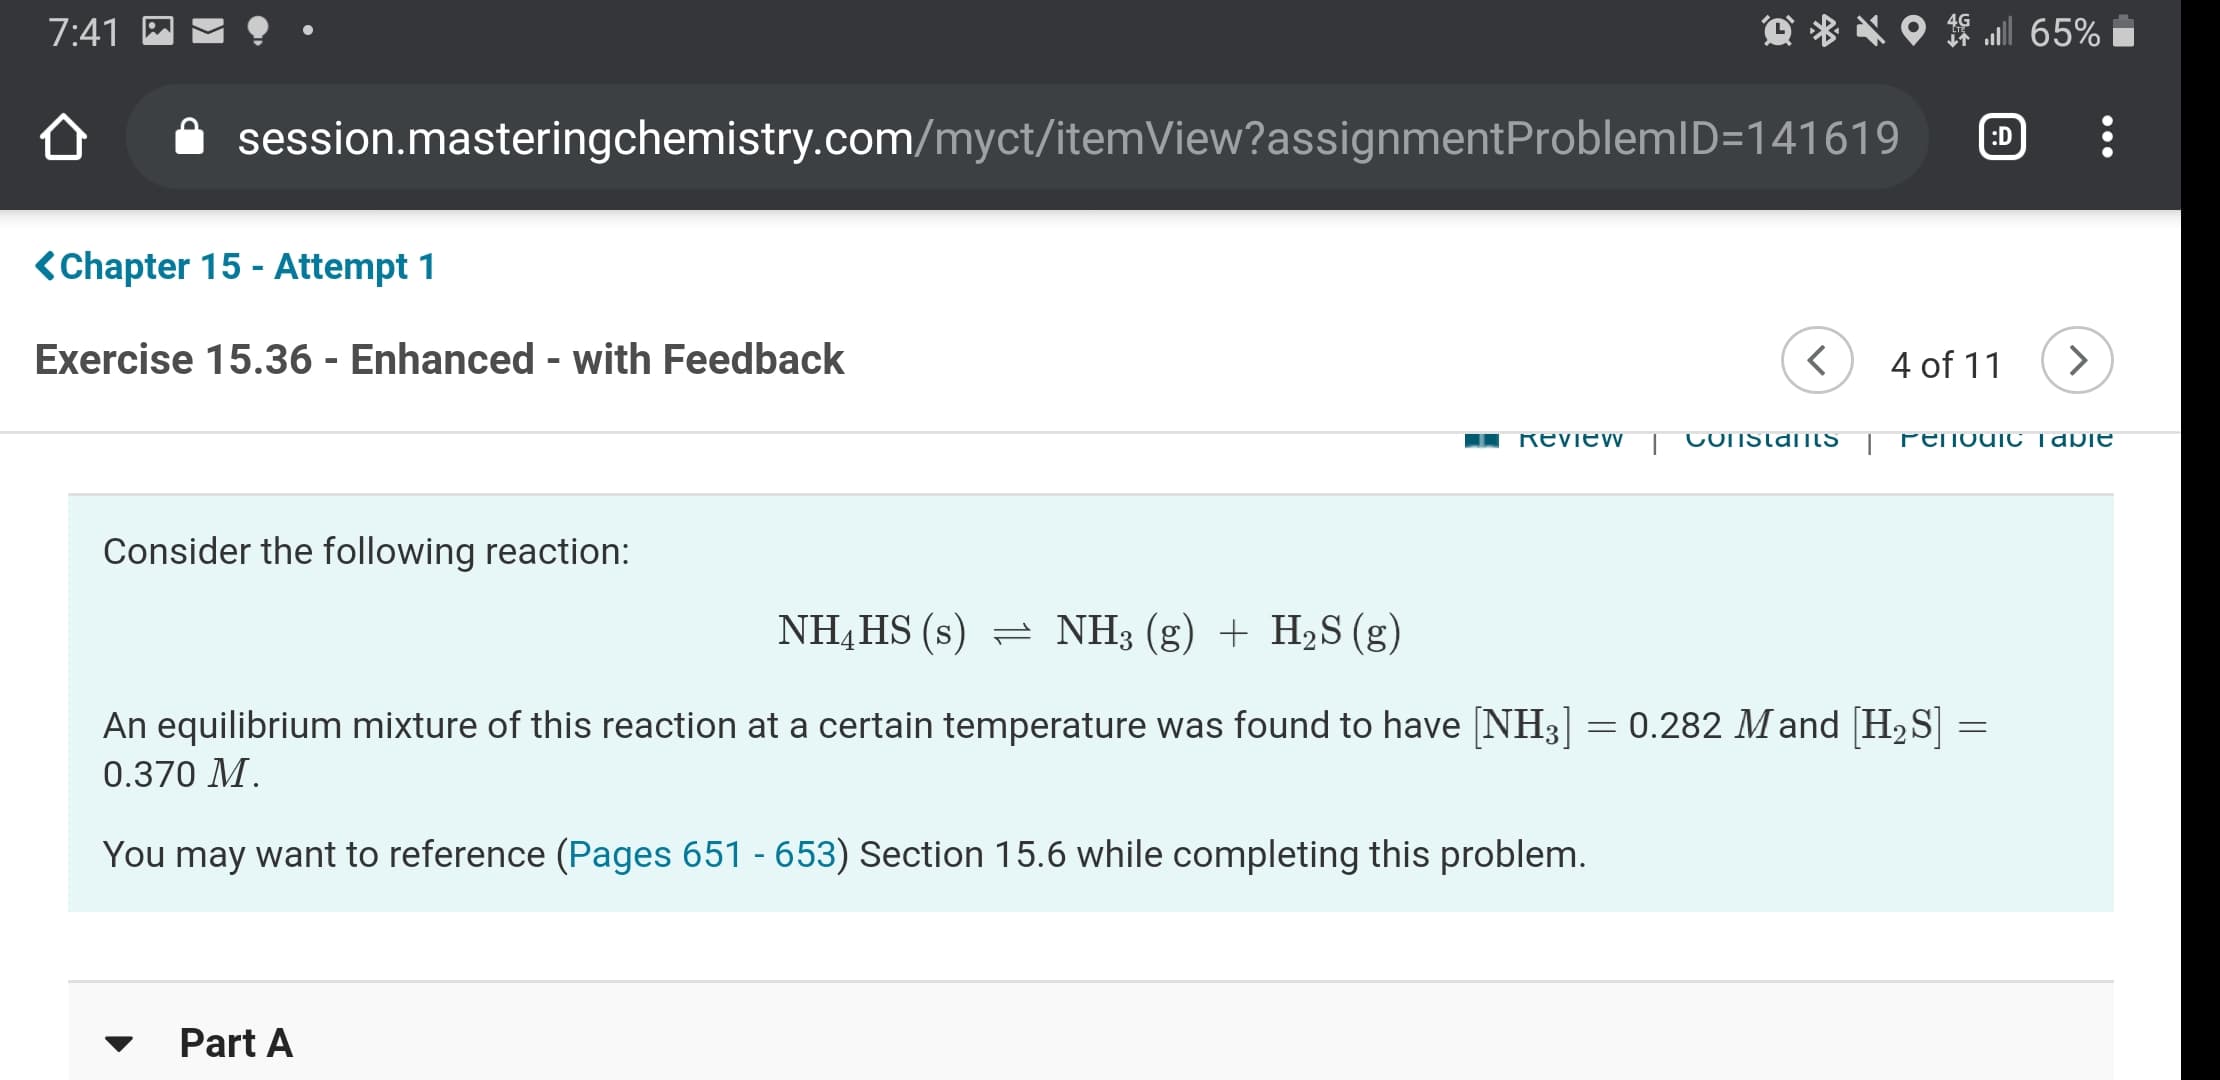 7:41
session.masteringchemistry.com/myct/itemView?assignmentProblemID=141619
:D
<Chapter 15 - Attempt 1
Exercise 15.36 - Enhanced - with Feedback
4 of 11
Review
COnstanIS
PenodioC Tabie
Consider the following reaction:
NH,HS (s) = NH3 (g) + H2S (g)
An equilibrium mixture of this reaction at a certain temperature was found to have NH3]
0.282 Mand [H2S] =
0.370 M.
You may want to reference (Pages 651 - 653) Section 15.6 while completing this problem.
Part A
